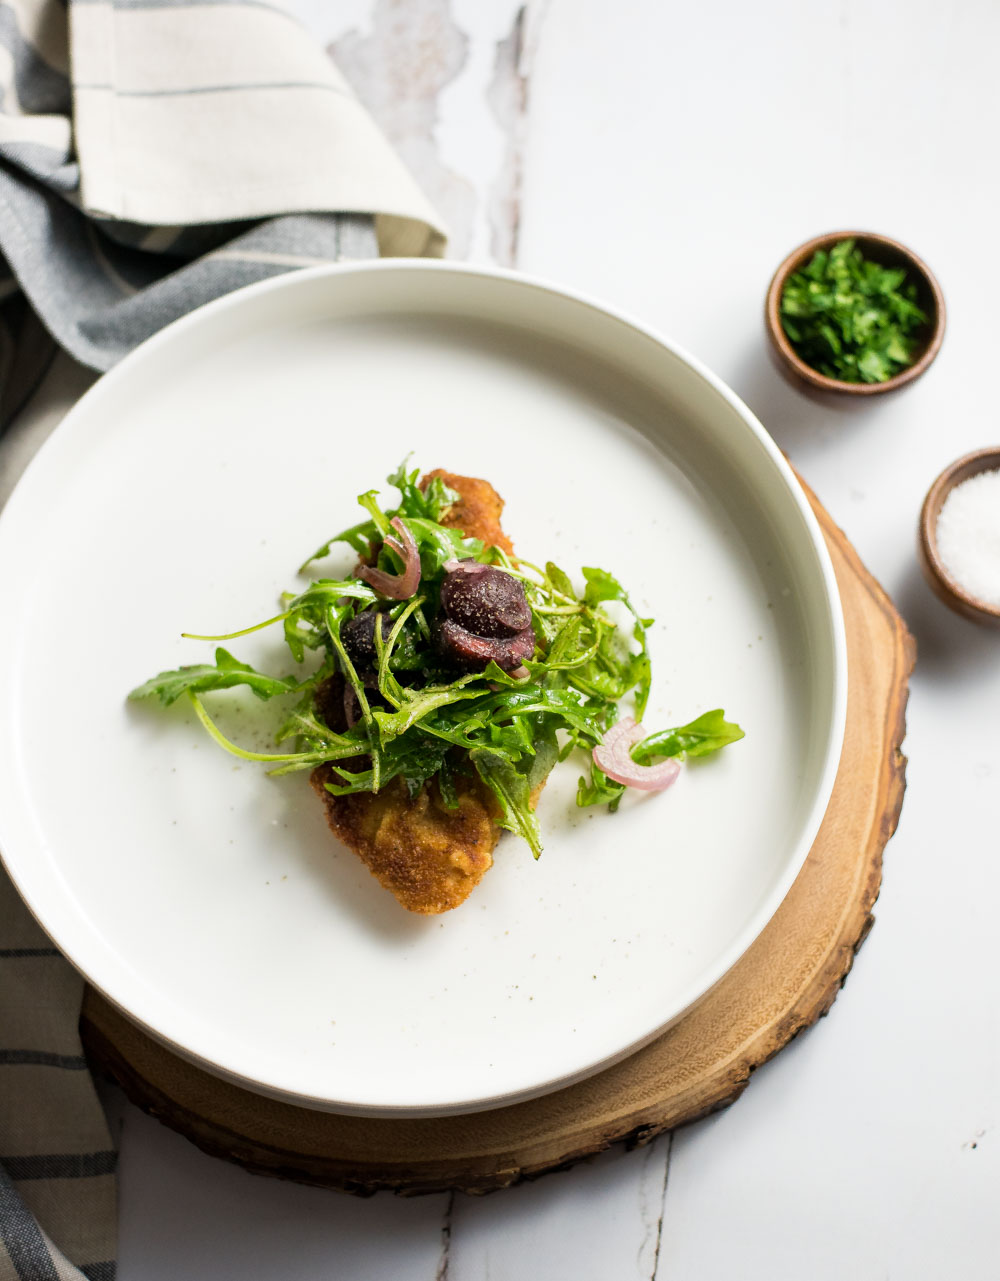 Lighter pan-fried chicken breast with cherry and arugula salad is the perfect weeknight meal that is light, nutritious, and delicious!